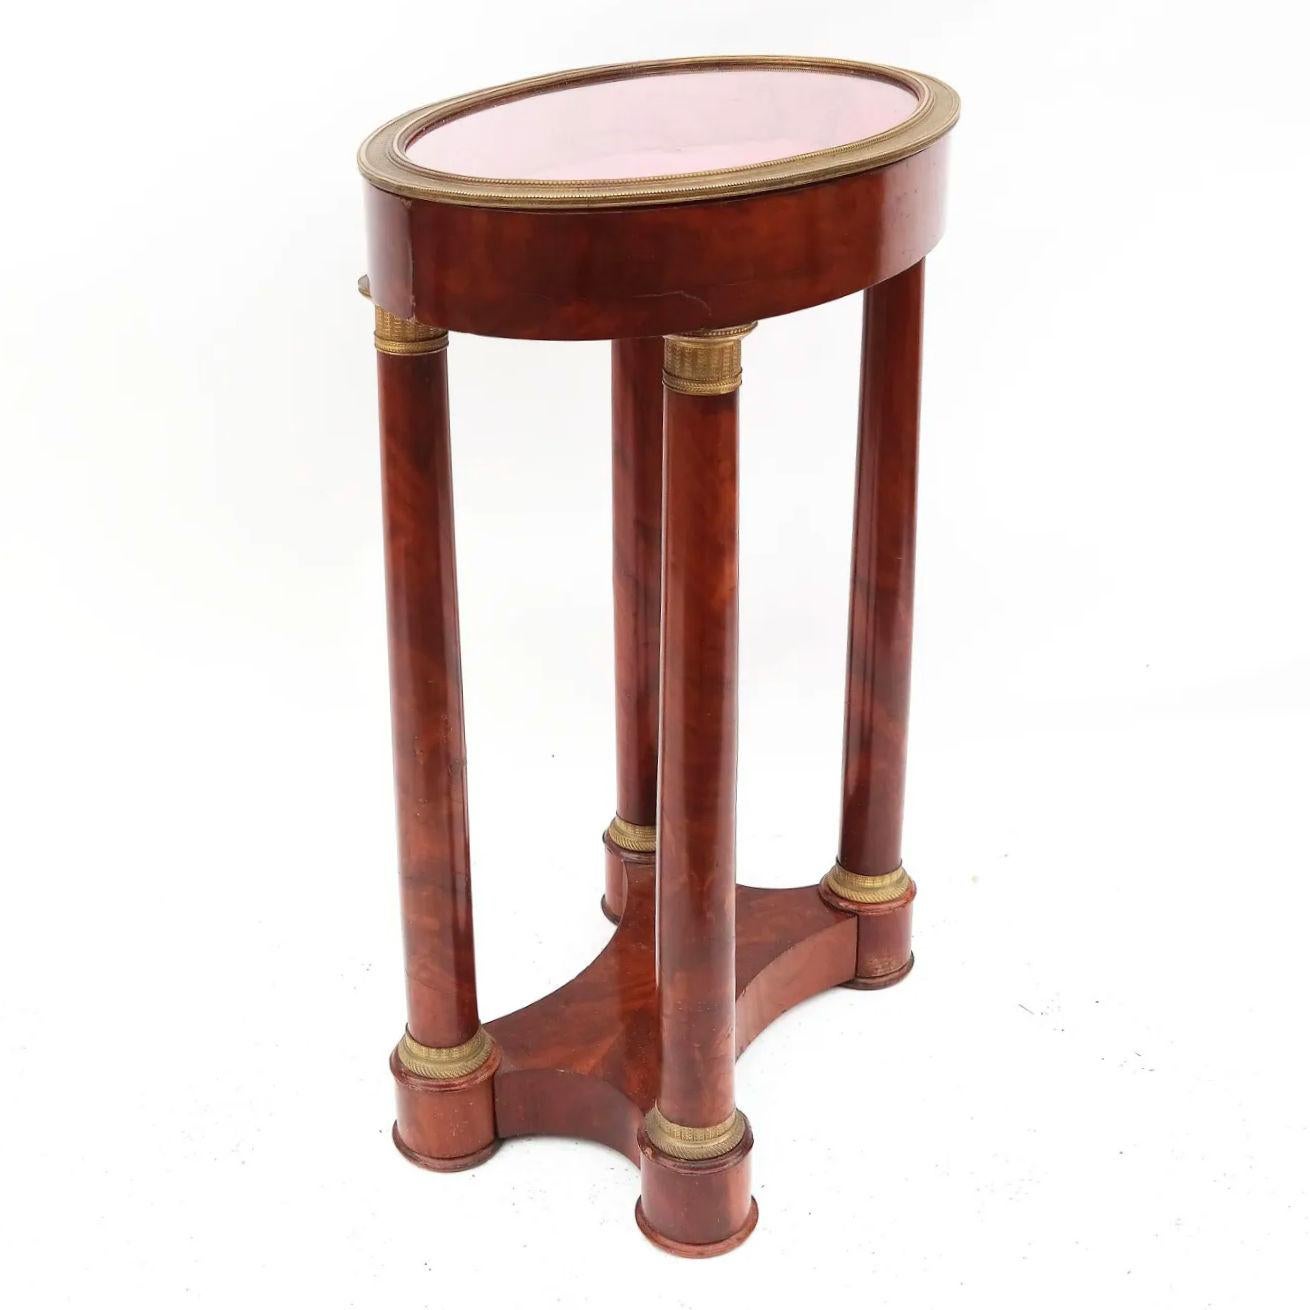 Our exceptional curio table in the French Empire style is crafted from mahogany with engine-turned gilt bronze mounts. Measures: 32 by 23 by 15 inches.